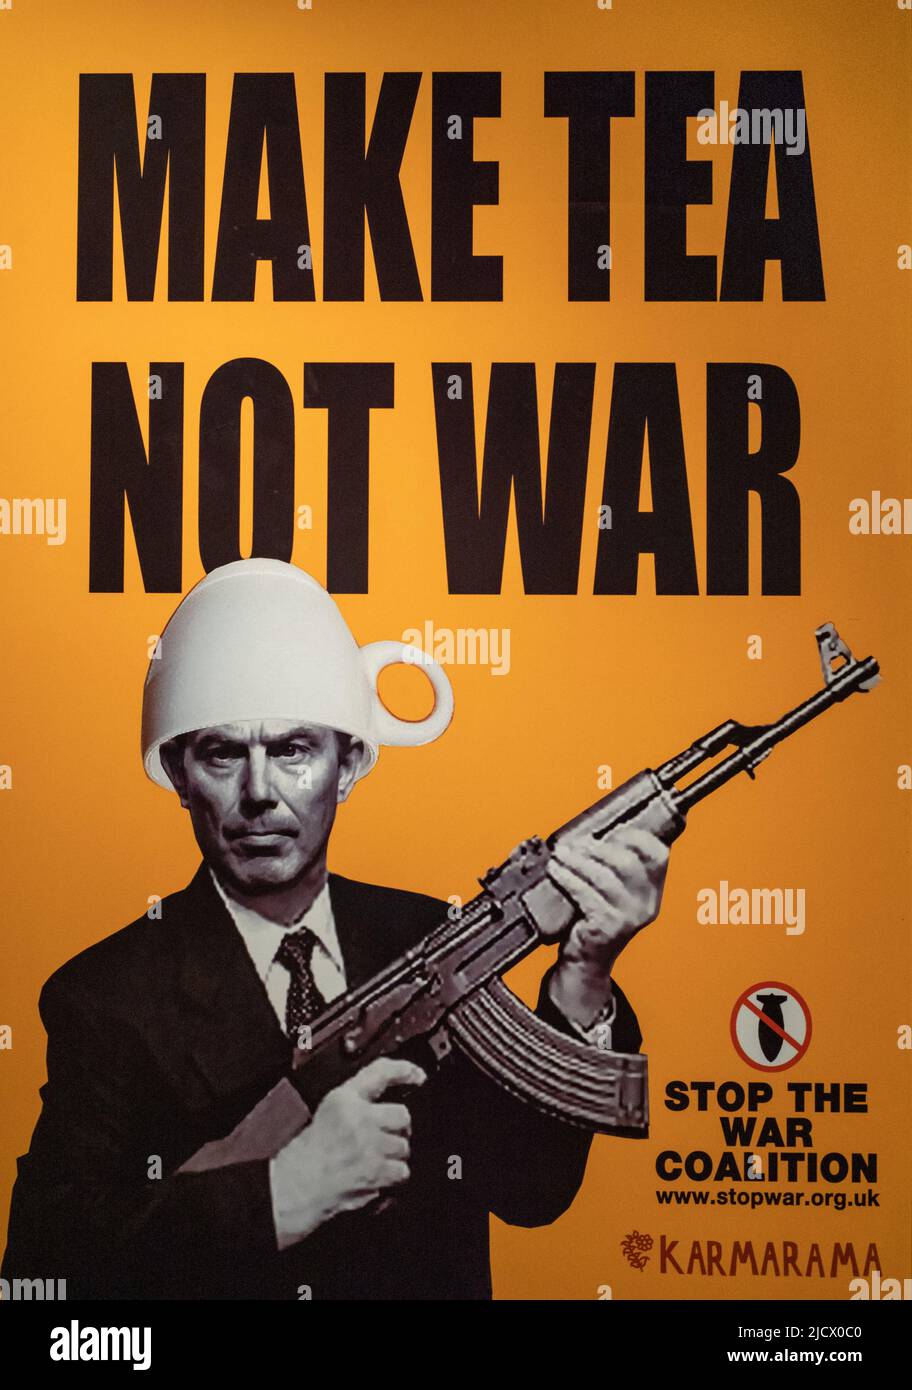 A protest poster against the Iraq War in 2003 on display at the Imperial War Museum (IWM) in London. Stock Photo